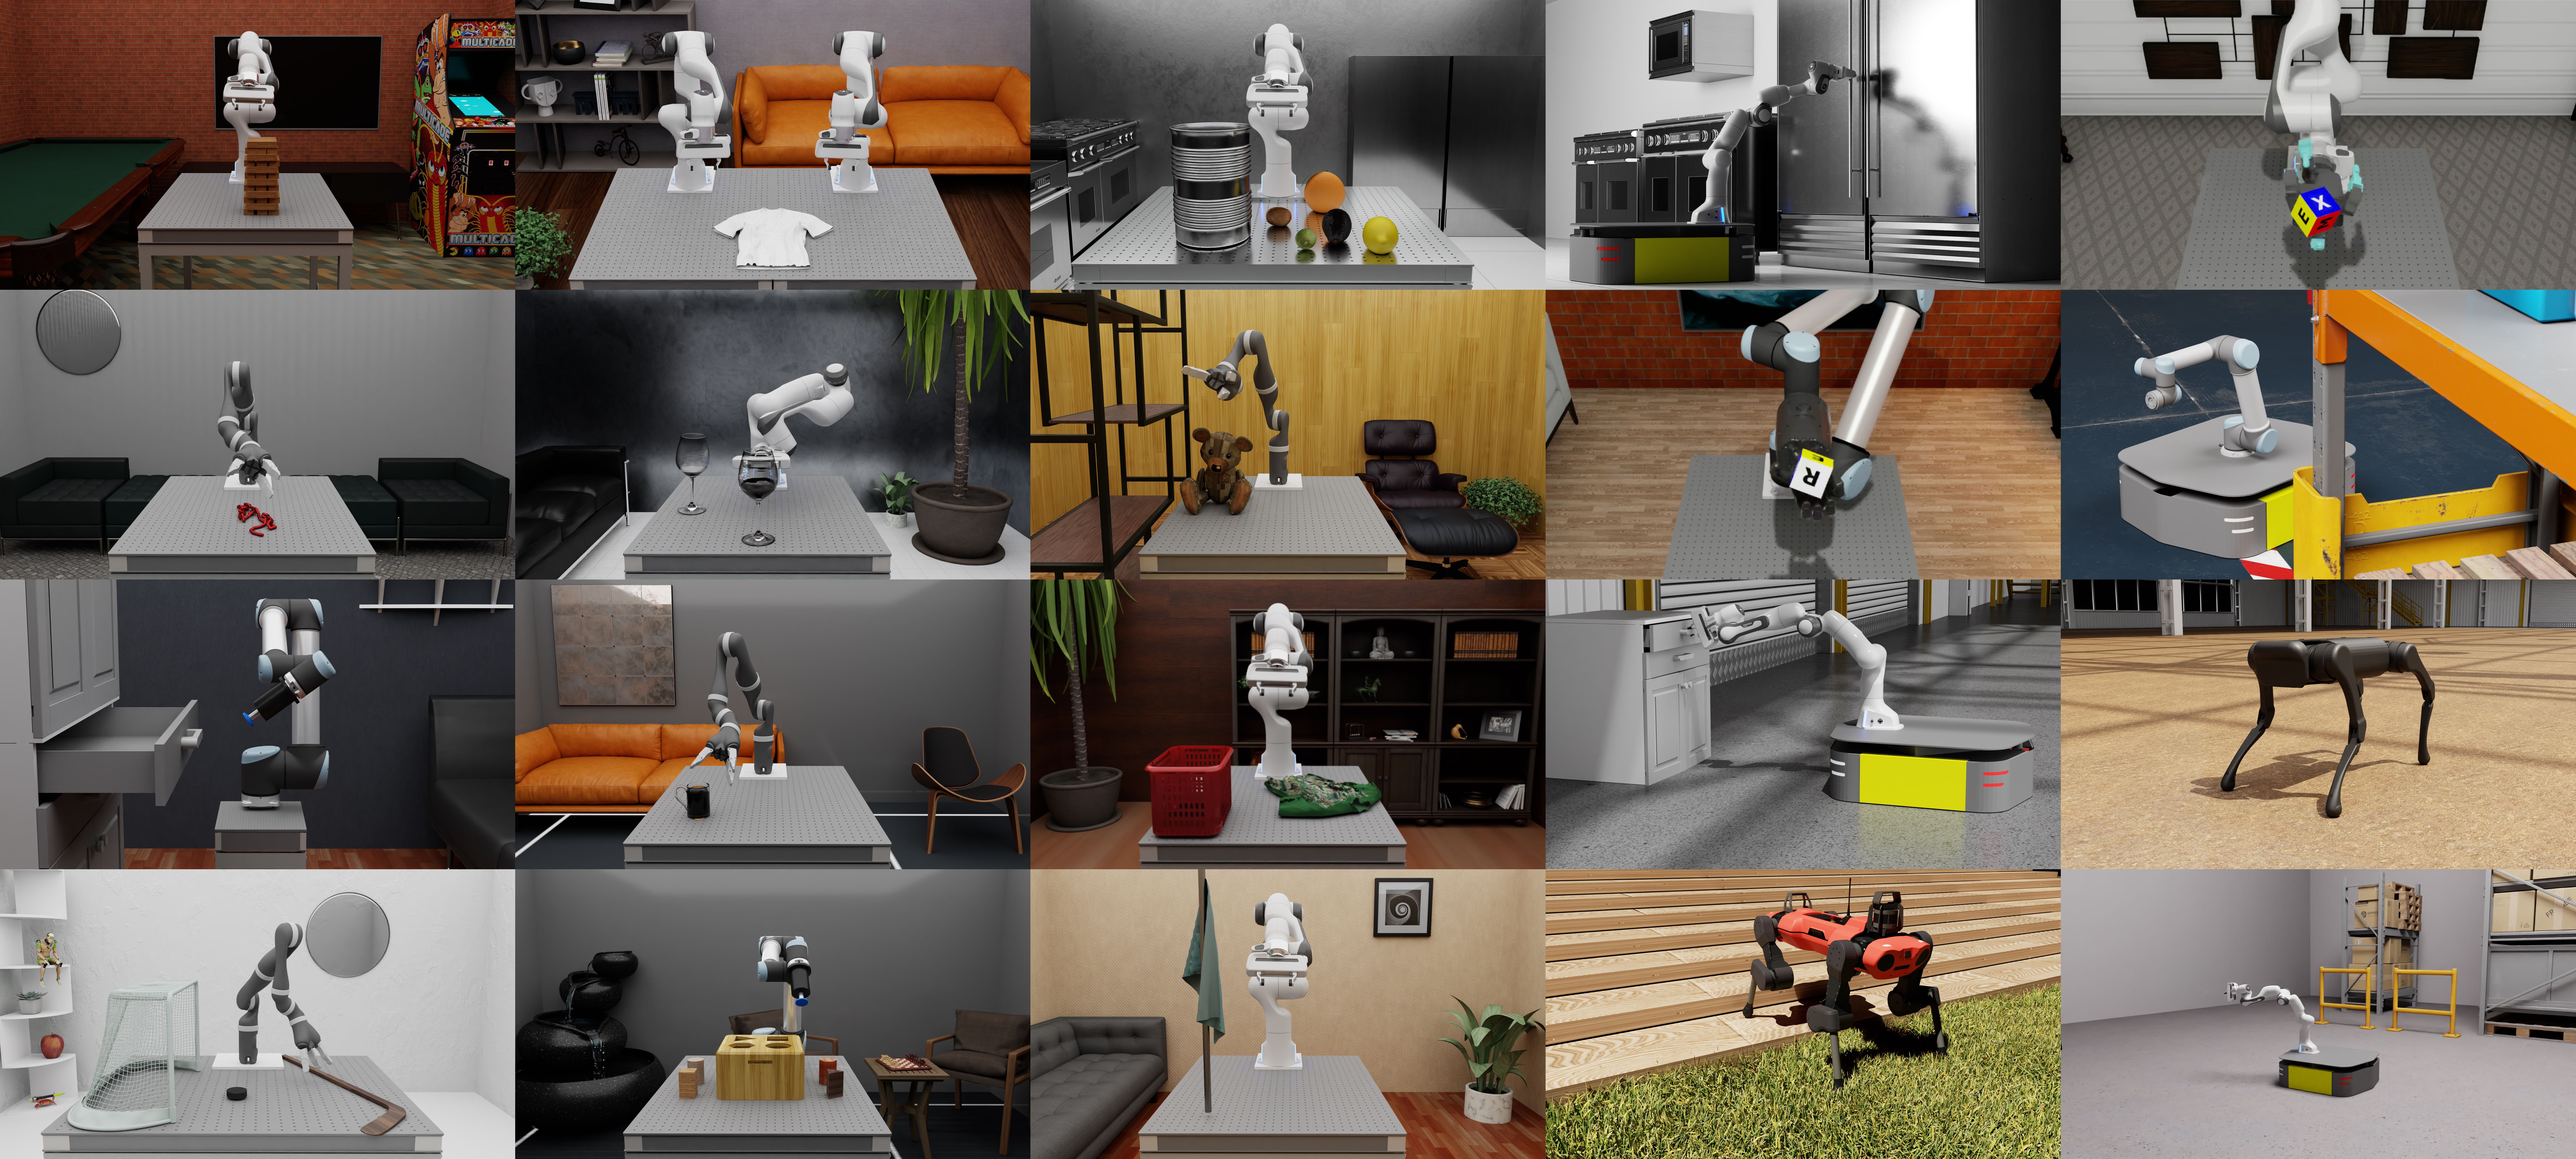 ORBIT: A Unified Simulation Framework Interactive Robot Learning Environments